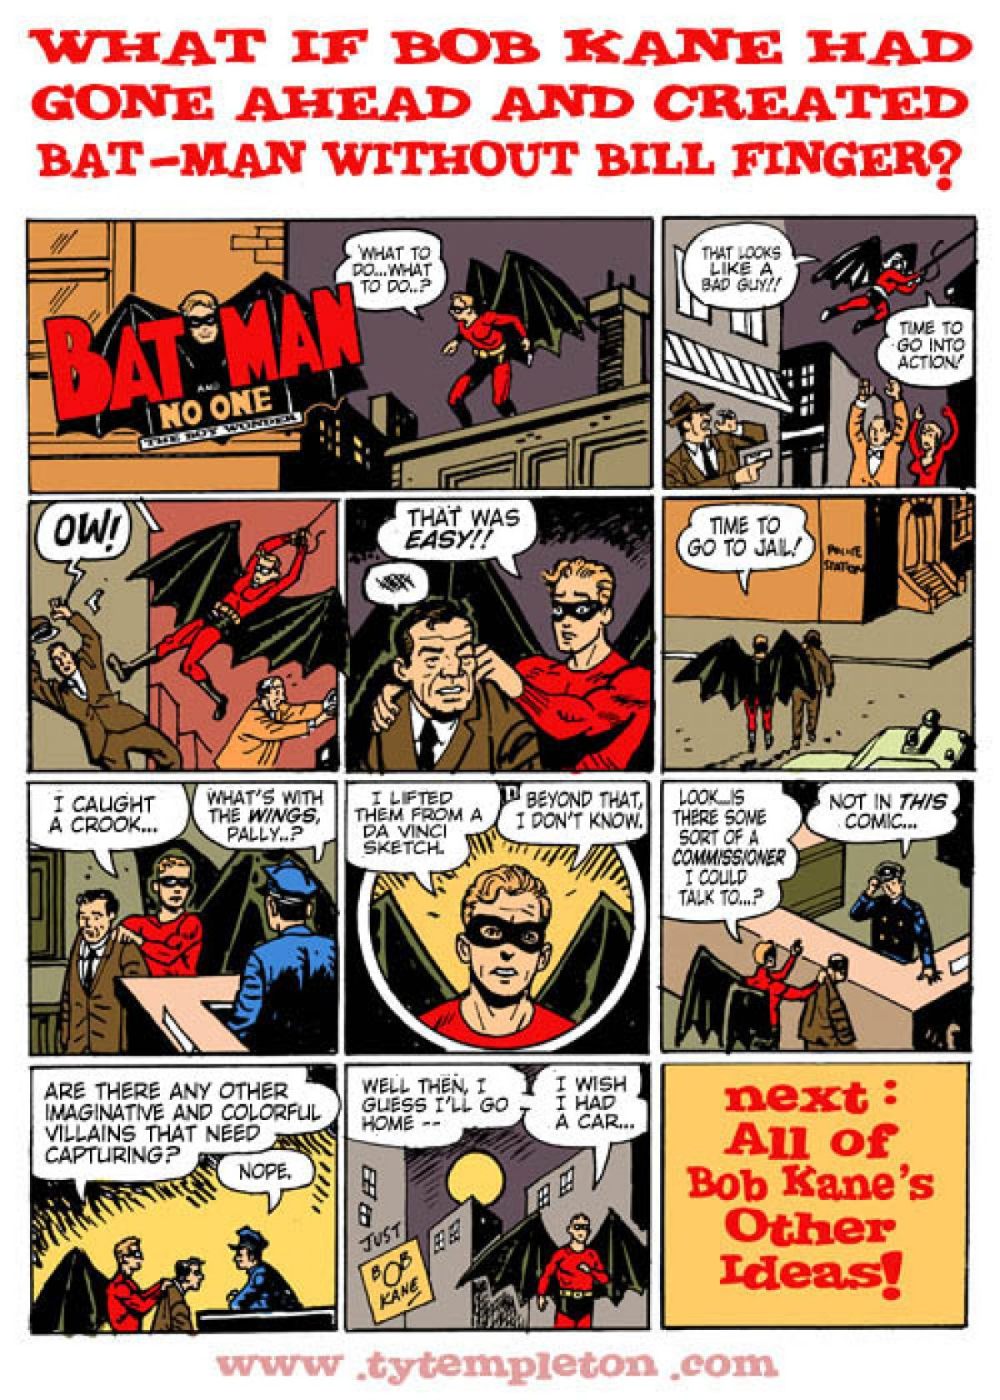 batman-without-bill-lettered_1200_1680_81_s